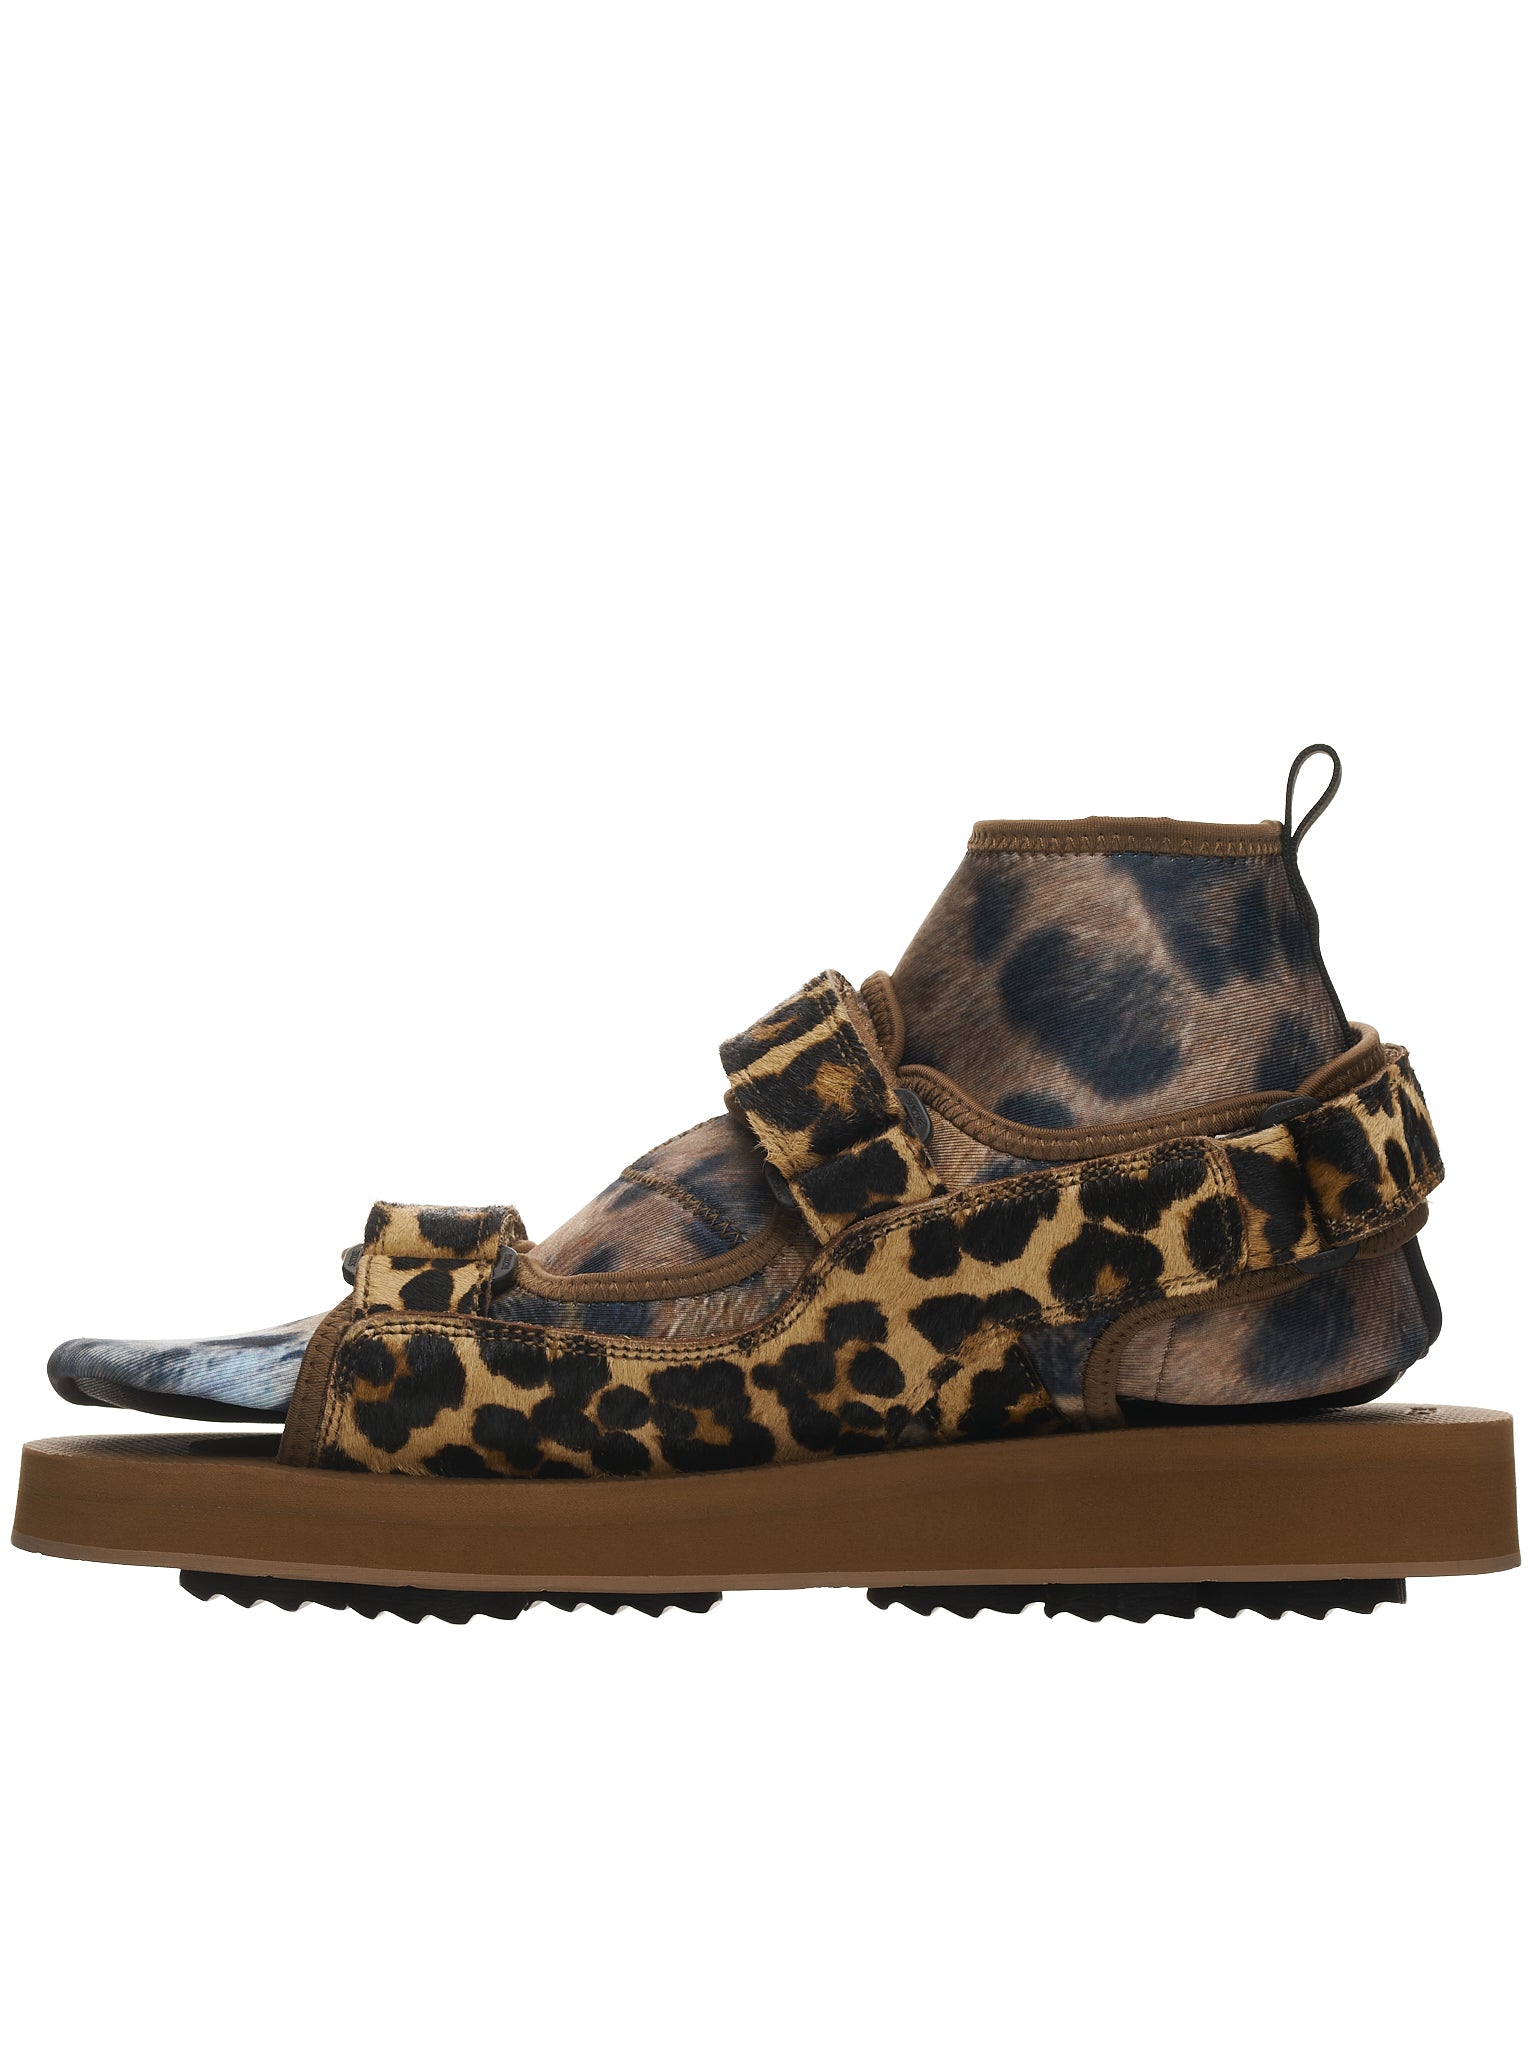 Doublet x Suicoke Animal Foot Layered Sandals | H.Lorenzo - side 2